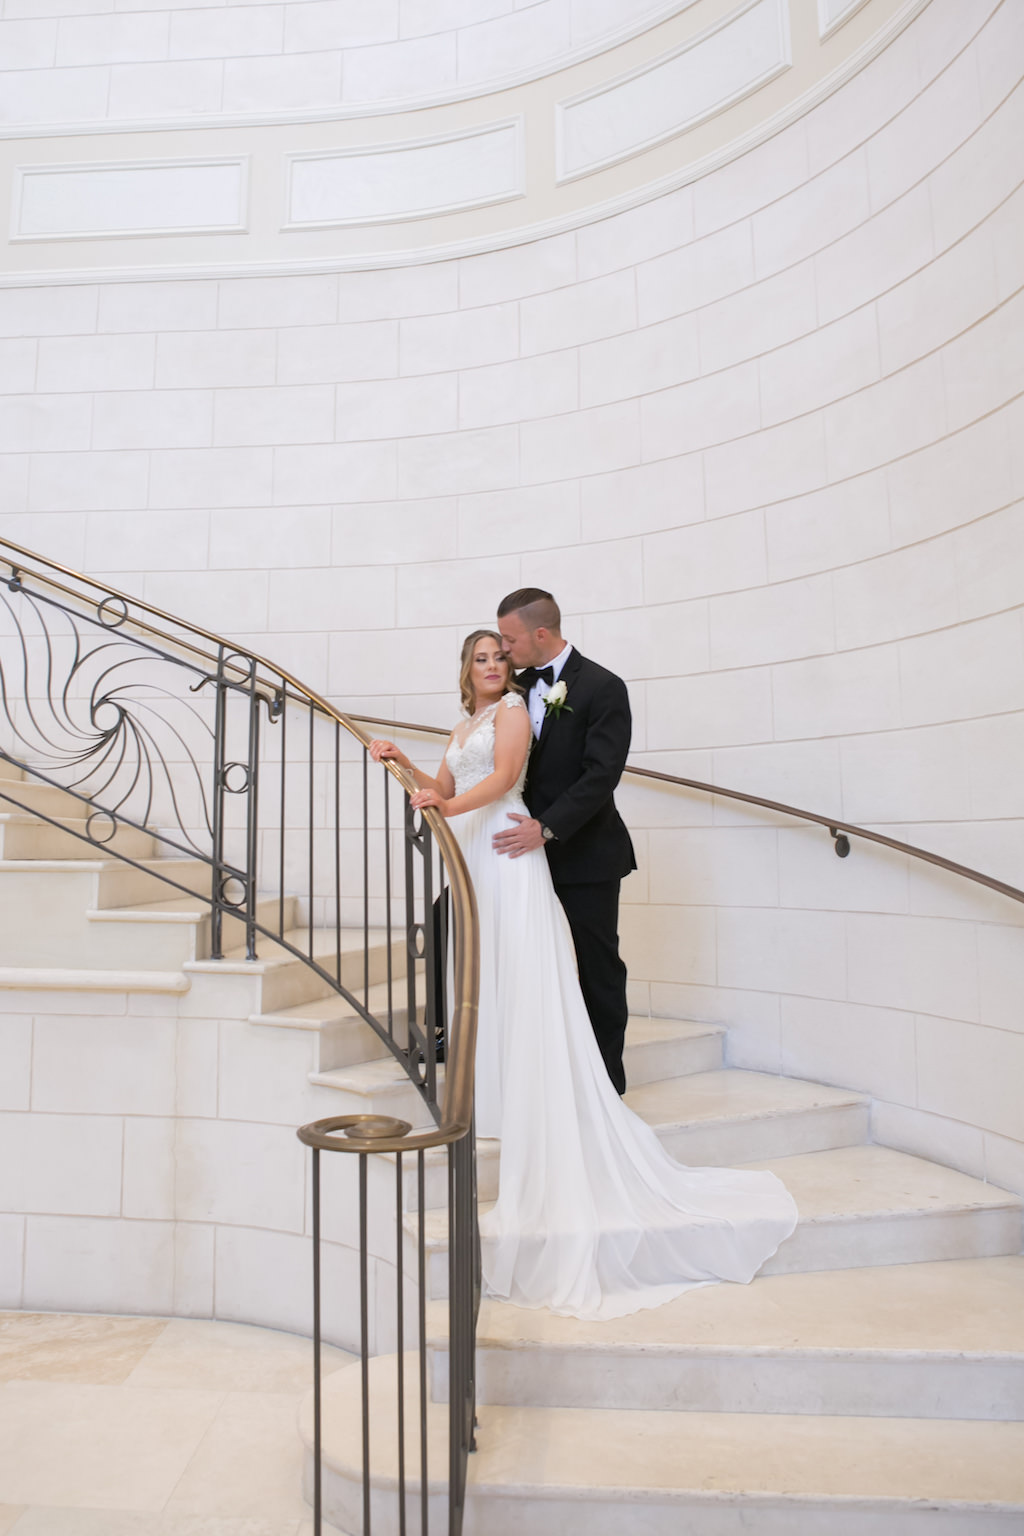 Bride and Groom Wedding Portrait on Staircase | Sarasota Wedding Photographer Carrie Wildes Photography